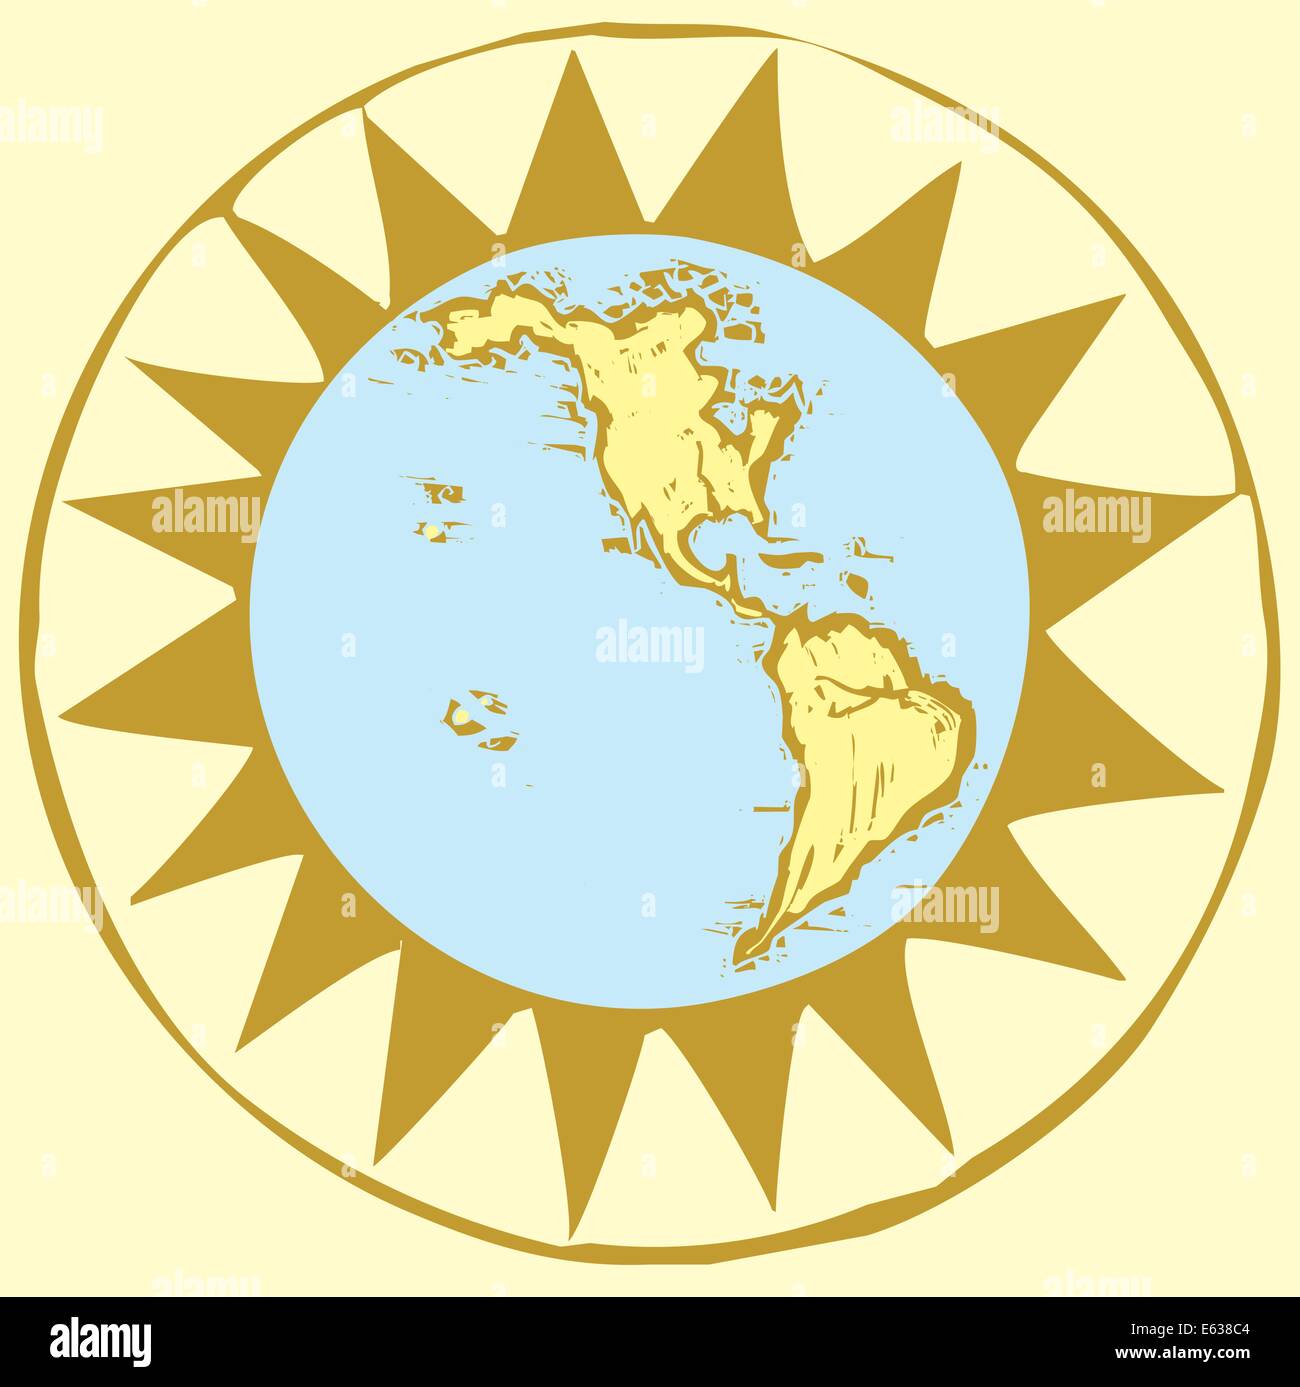 Hemisphere of the globe done in a woodcut style set in a compass rose. Stock Vector